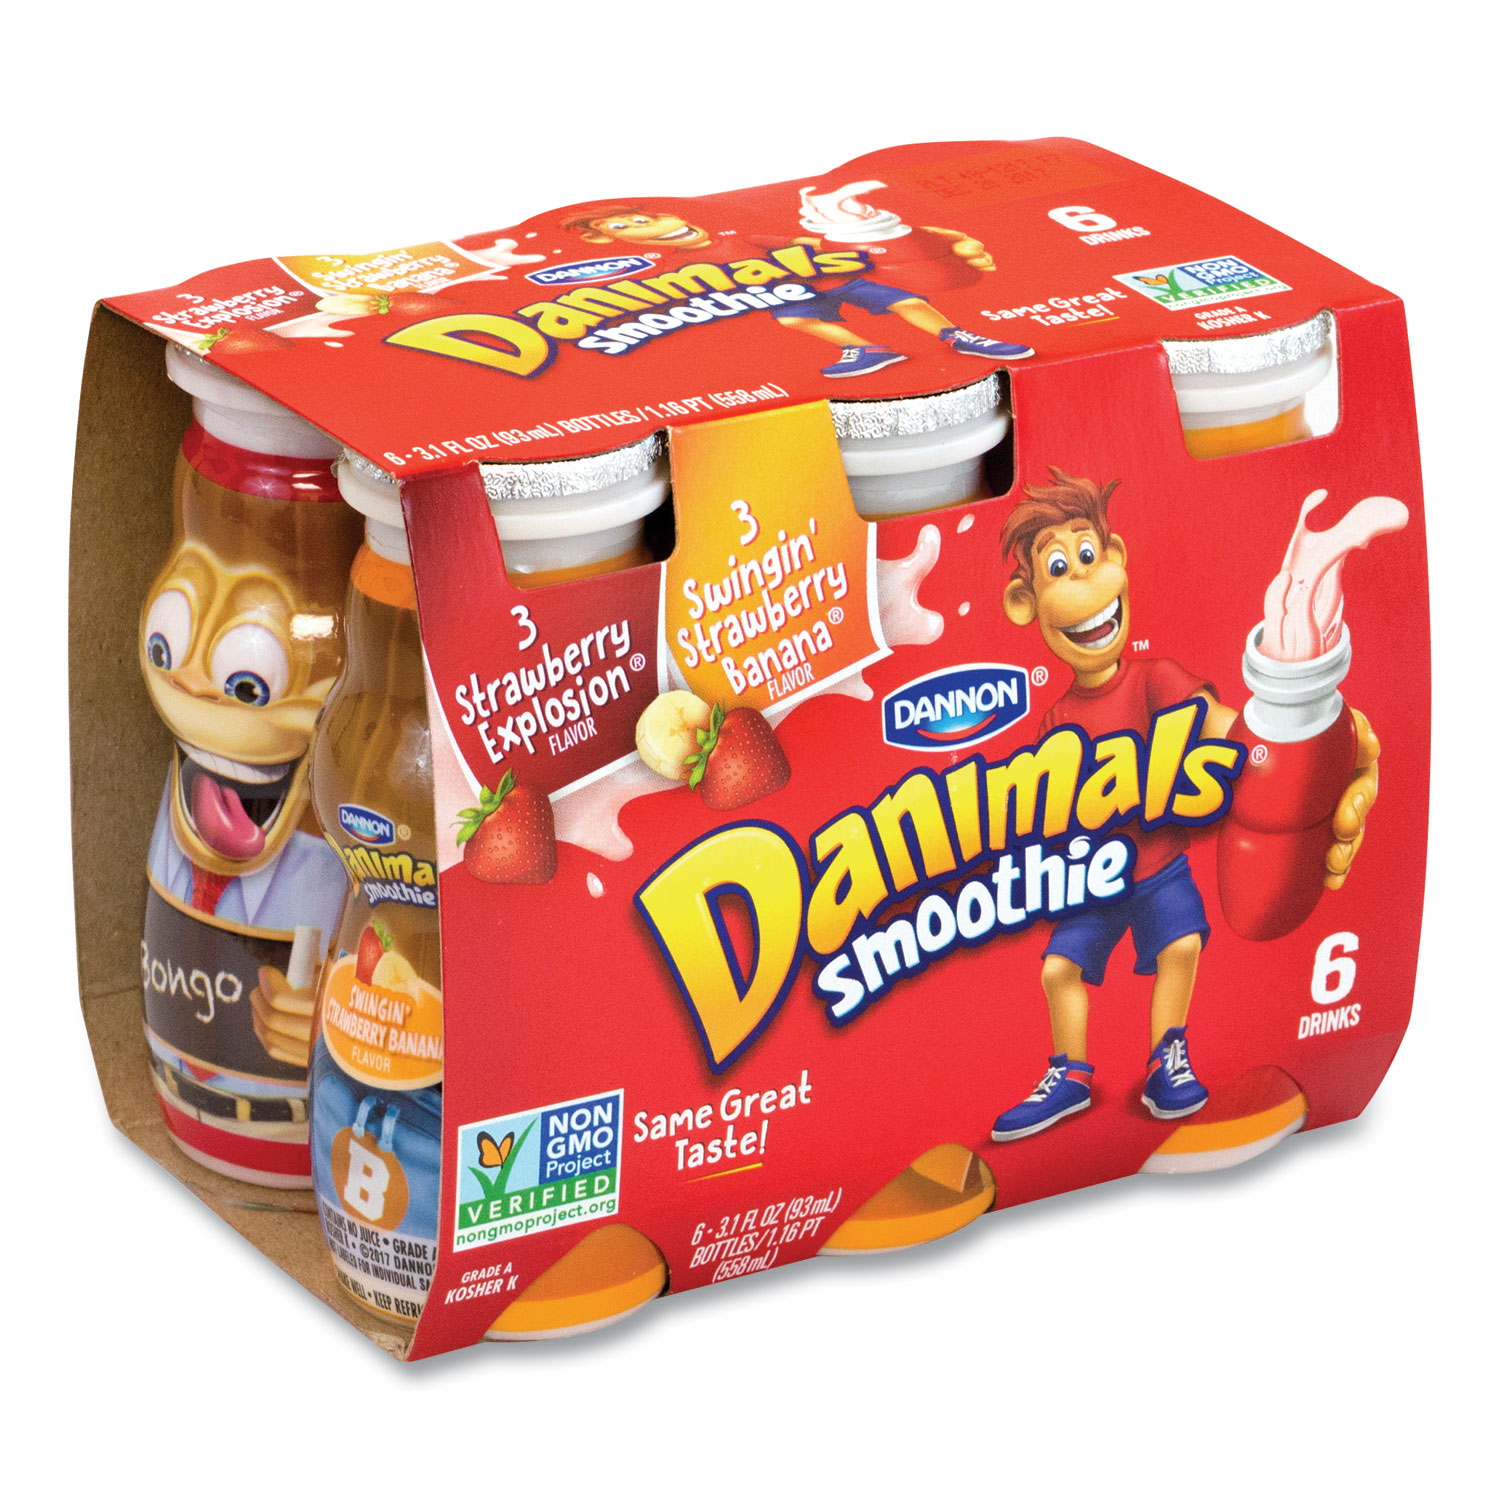  DANNON 980009611 Danimals Smoothies, Assorted Flavors, 3.1 oz Bottle, 6/Box, 6 Boxes/Carton, Free Delivery in 1-4 Business Days (GRR90200019) 